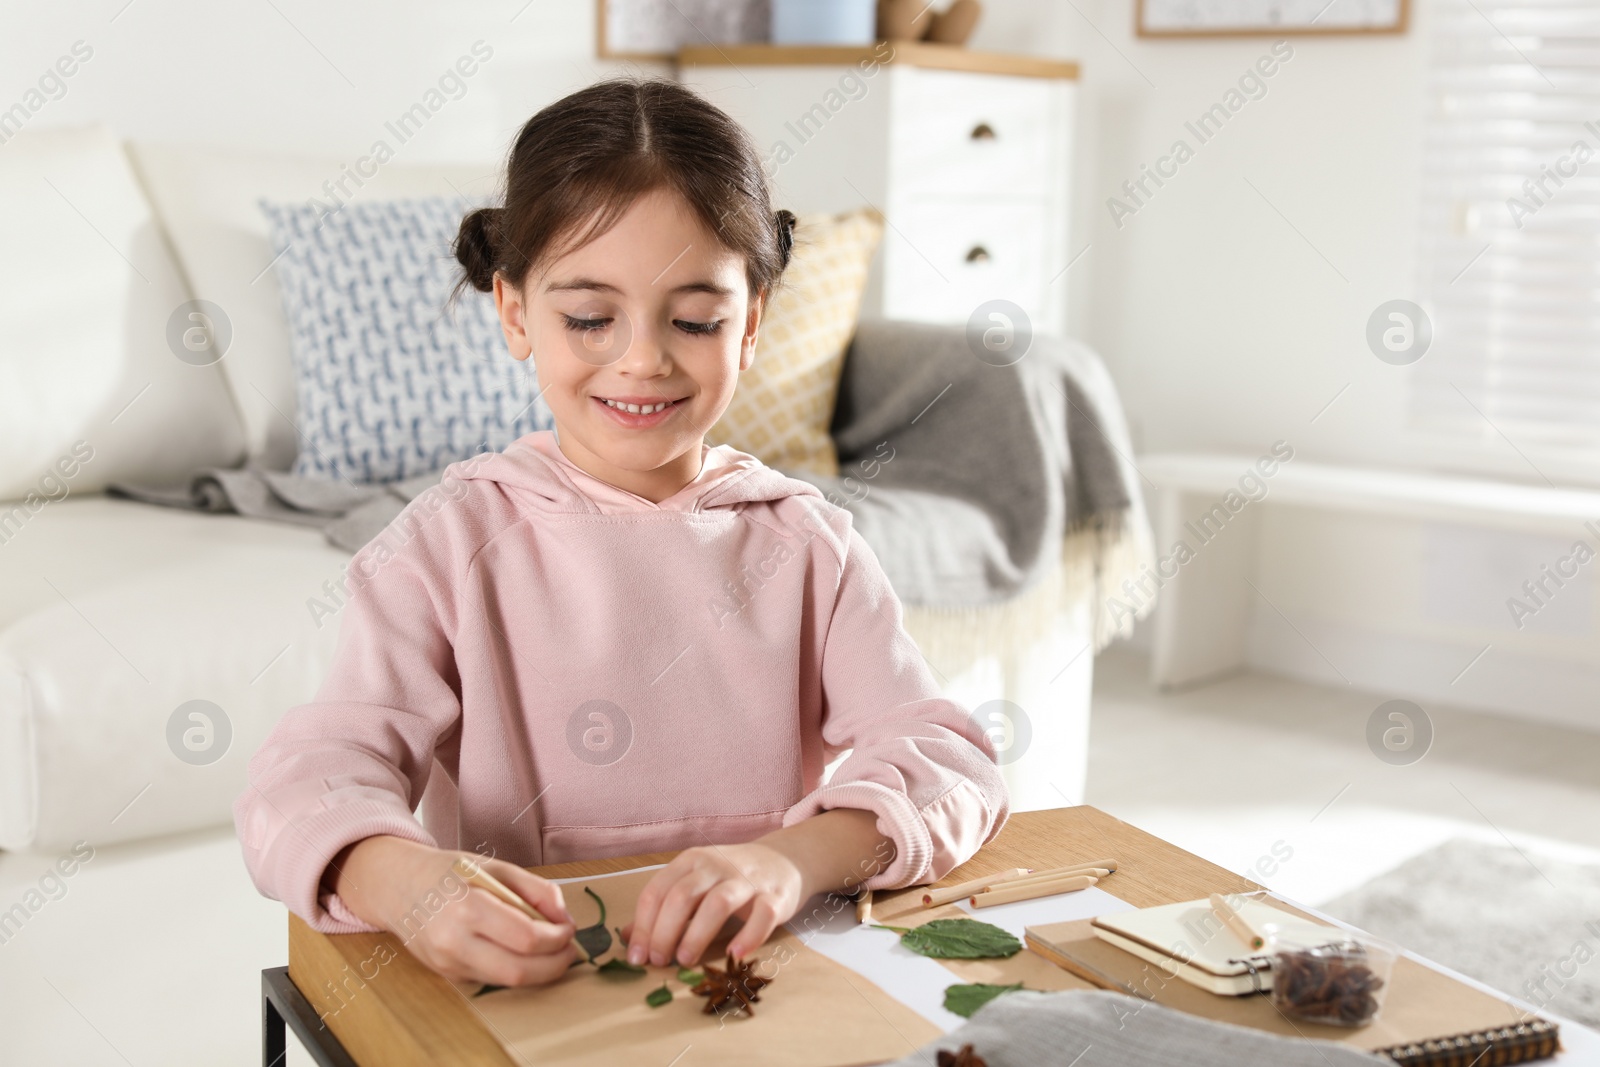 Photo of Little girl working with natural materials at table indoors. Creative hobby